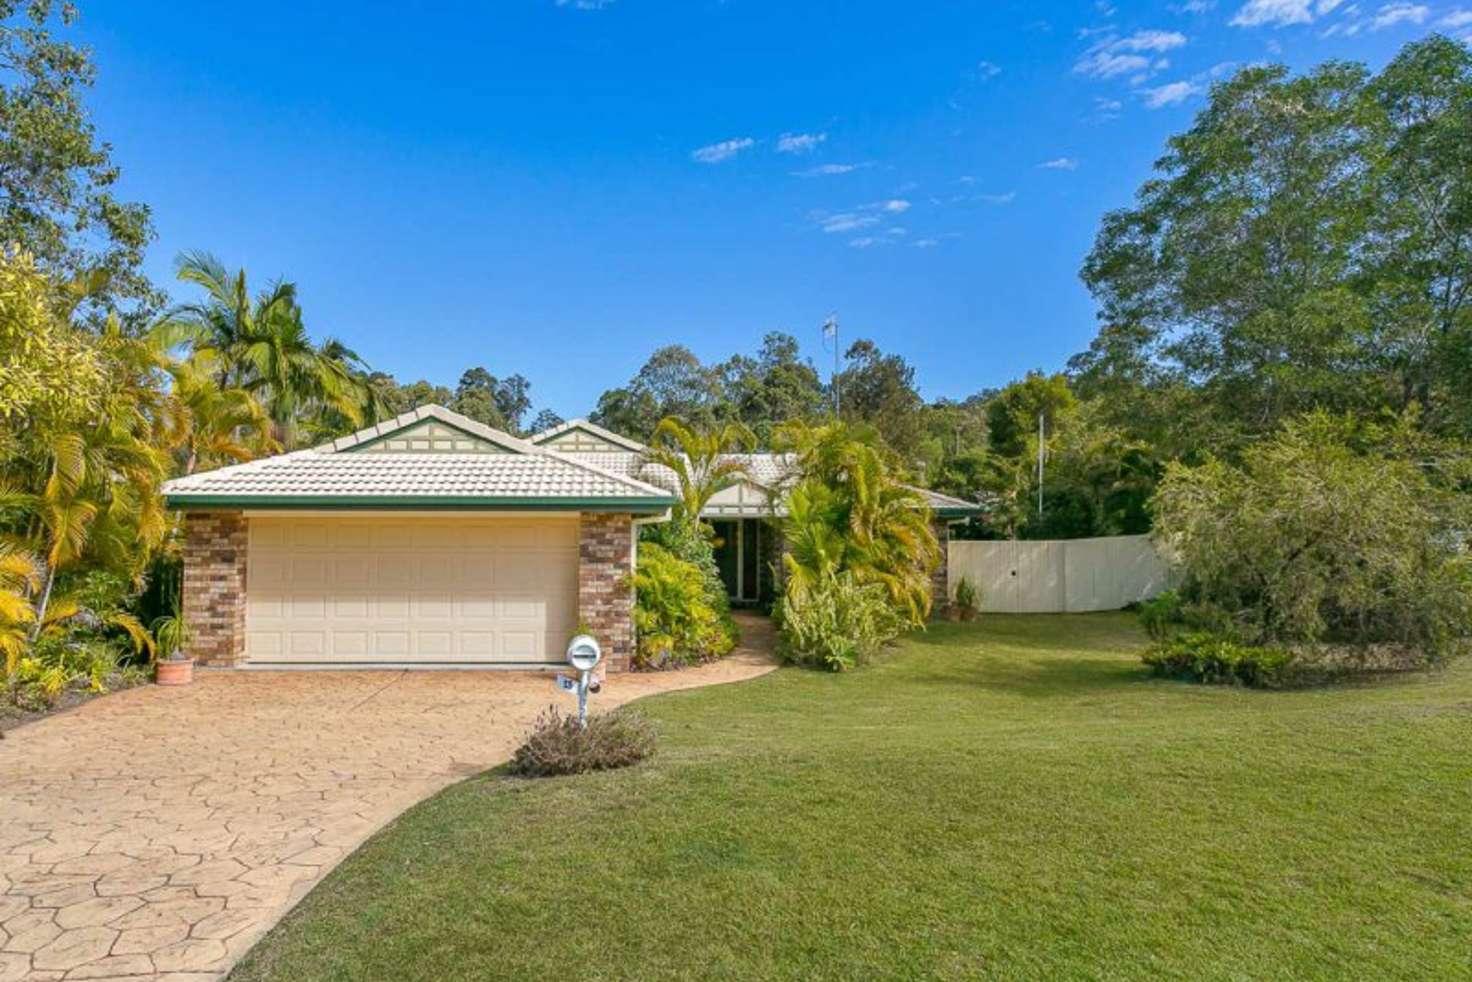 Main view of Homely house listing, 13 Stockman Crescent, Mudgeeraba QLD 4213